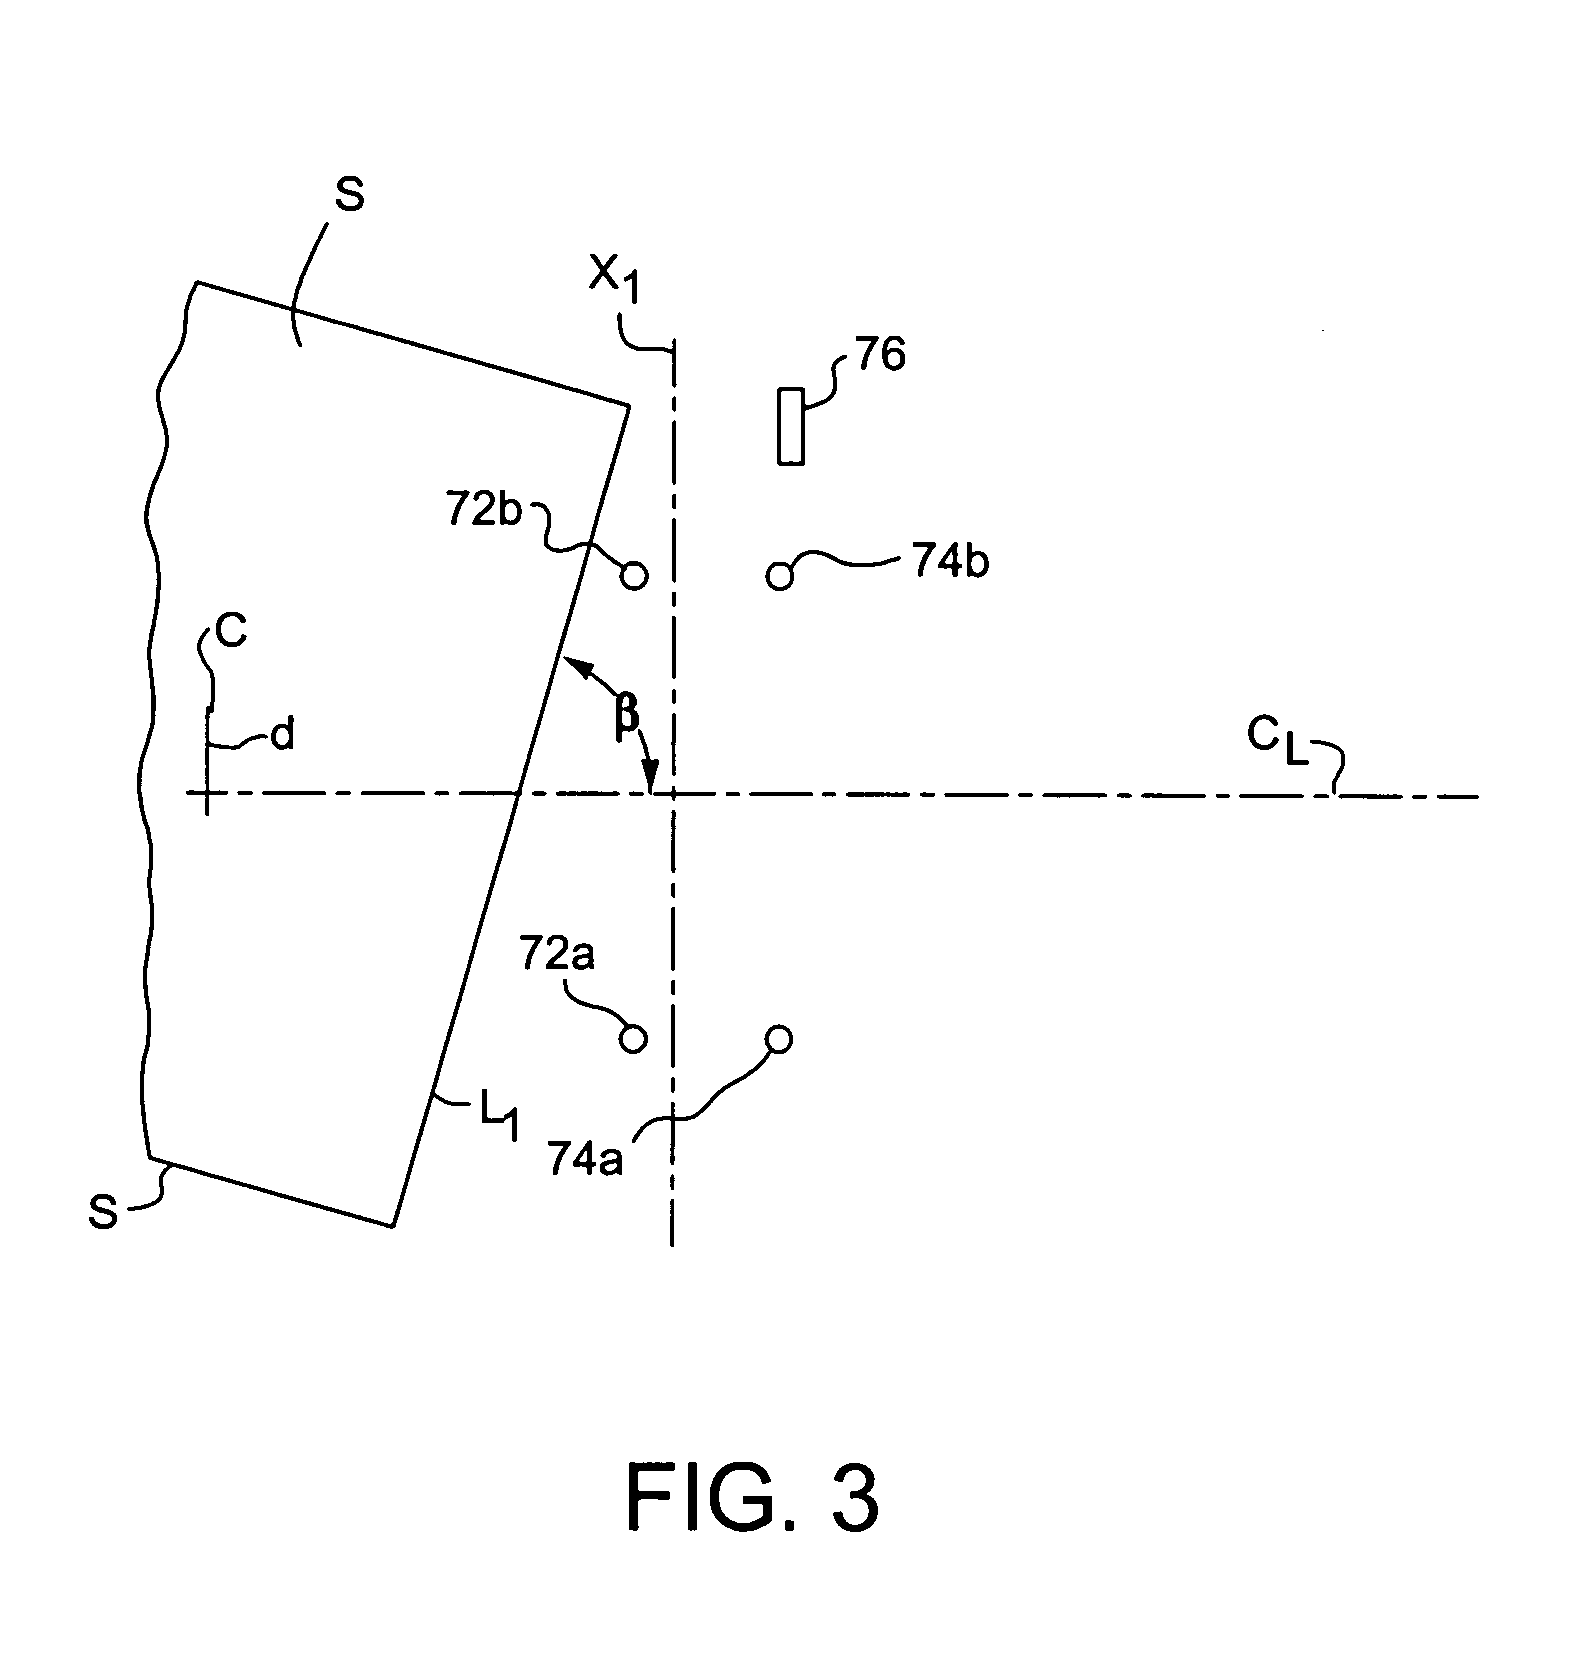 Method for registering sheets in a duplex reproduction machine for alleviating skew